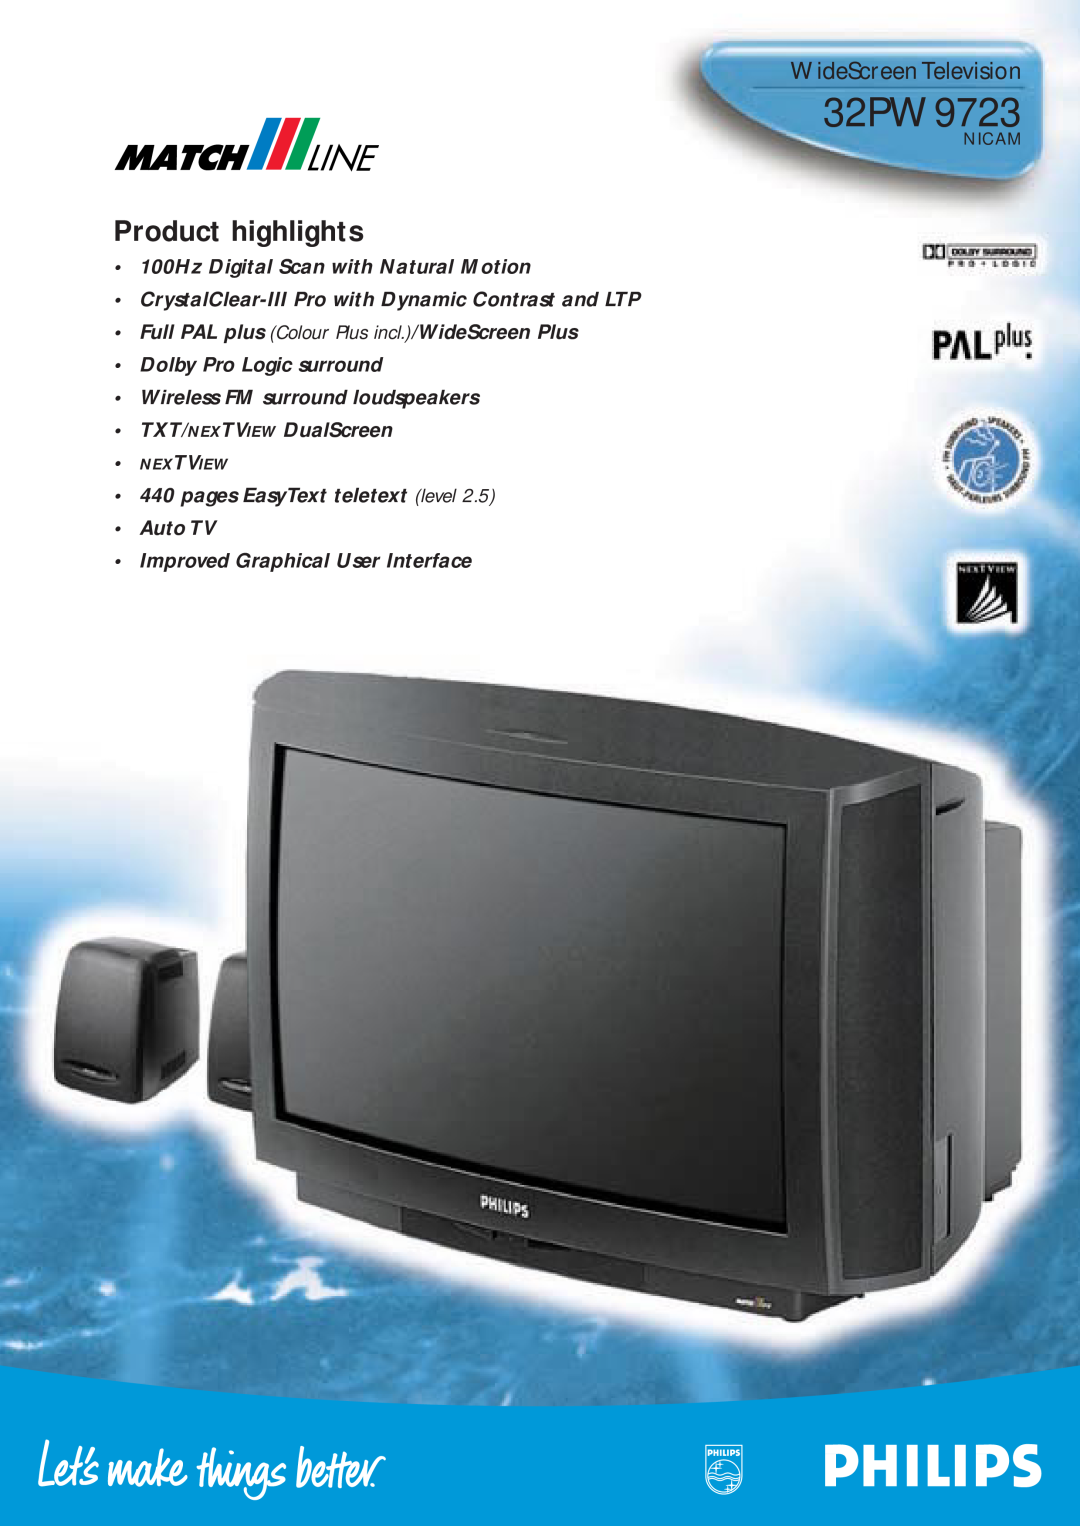 Philips 32PW9723NICAM manual WideScreen Television, Nicam, Product highlights, 100Hz Digital Scan with Natural Motion 